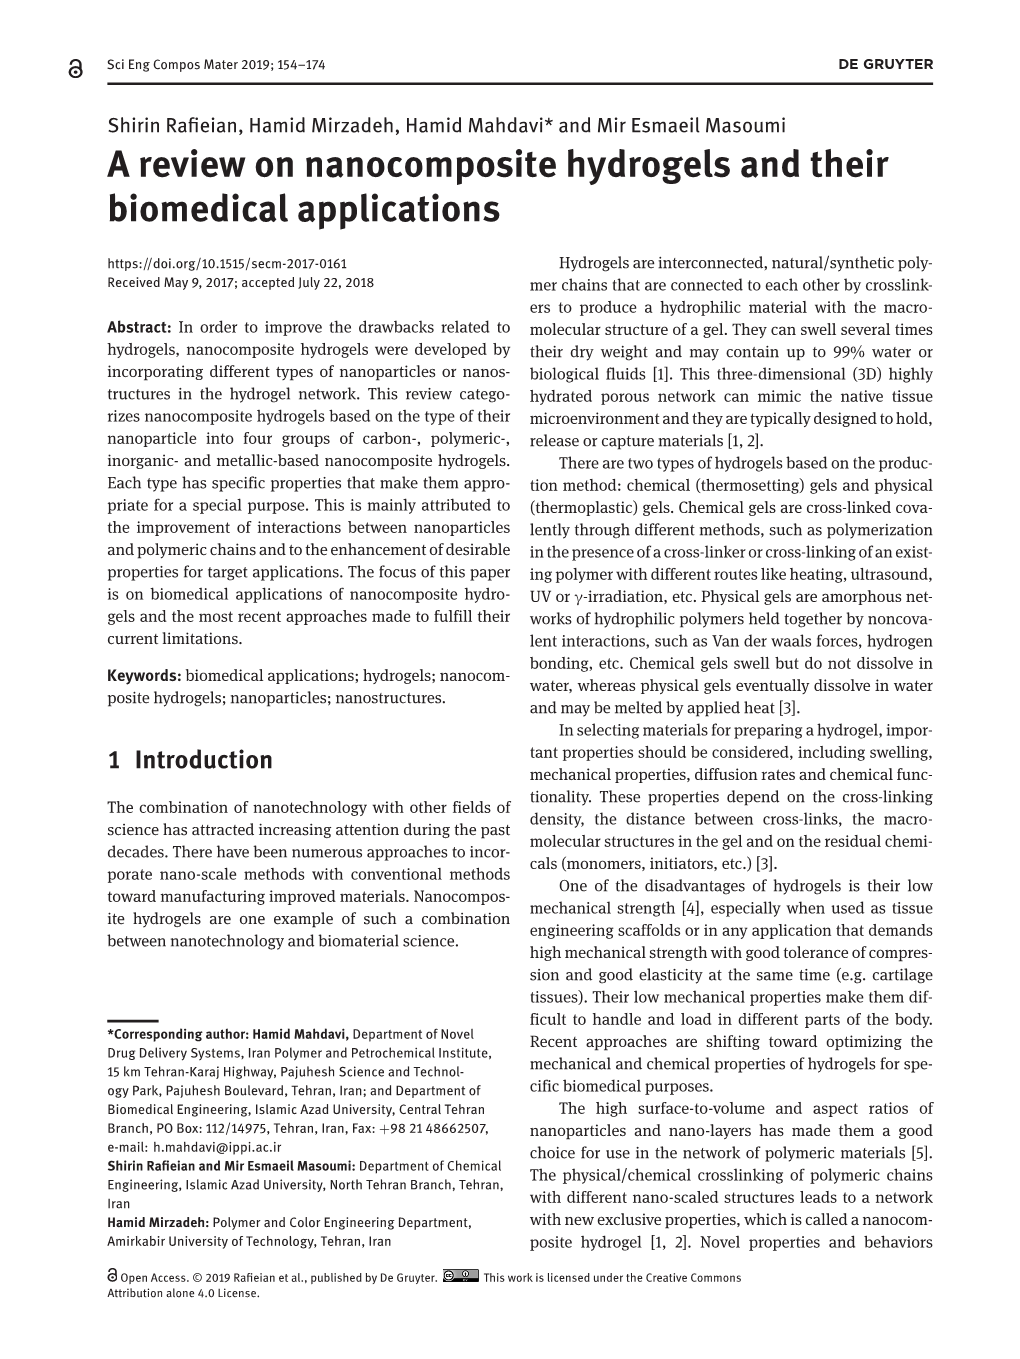 A Review on Nanocomposite Hydrogels and Their Biomedical Applications